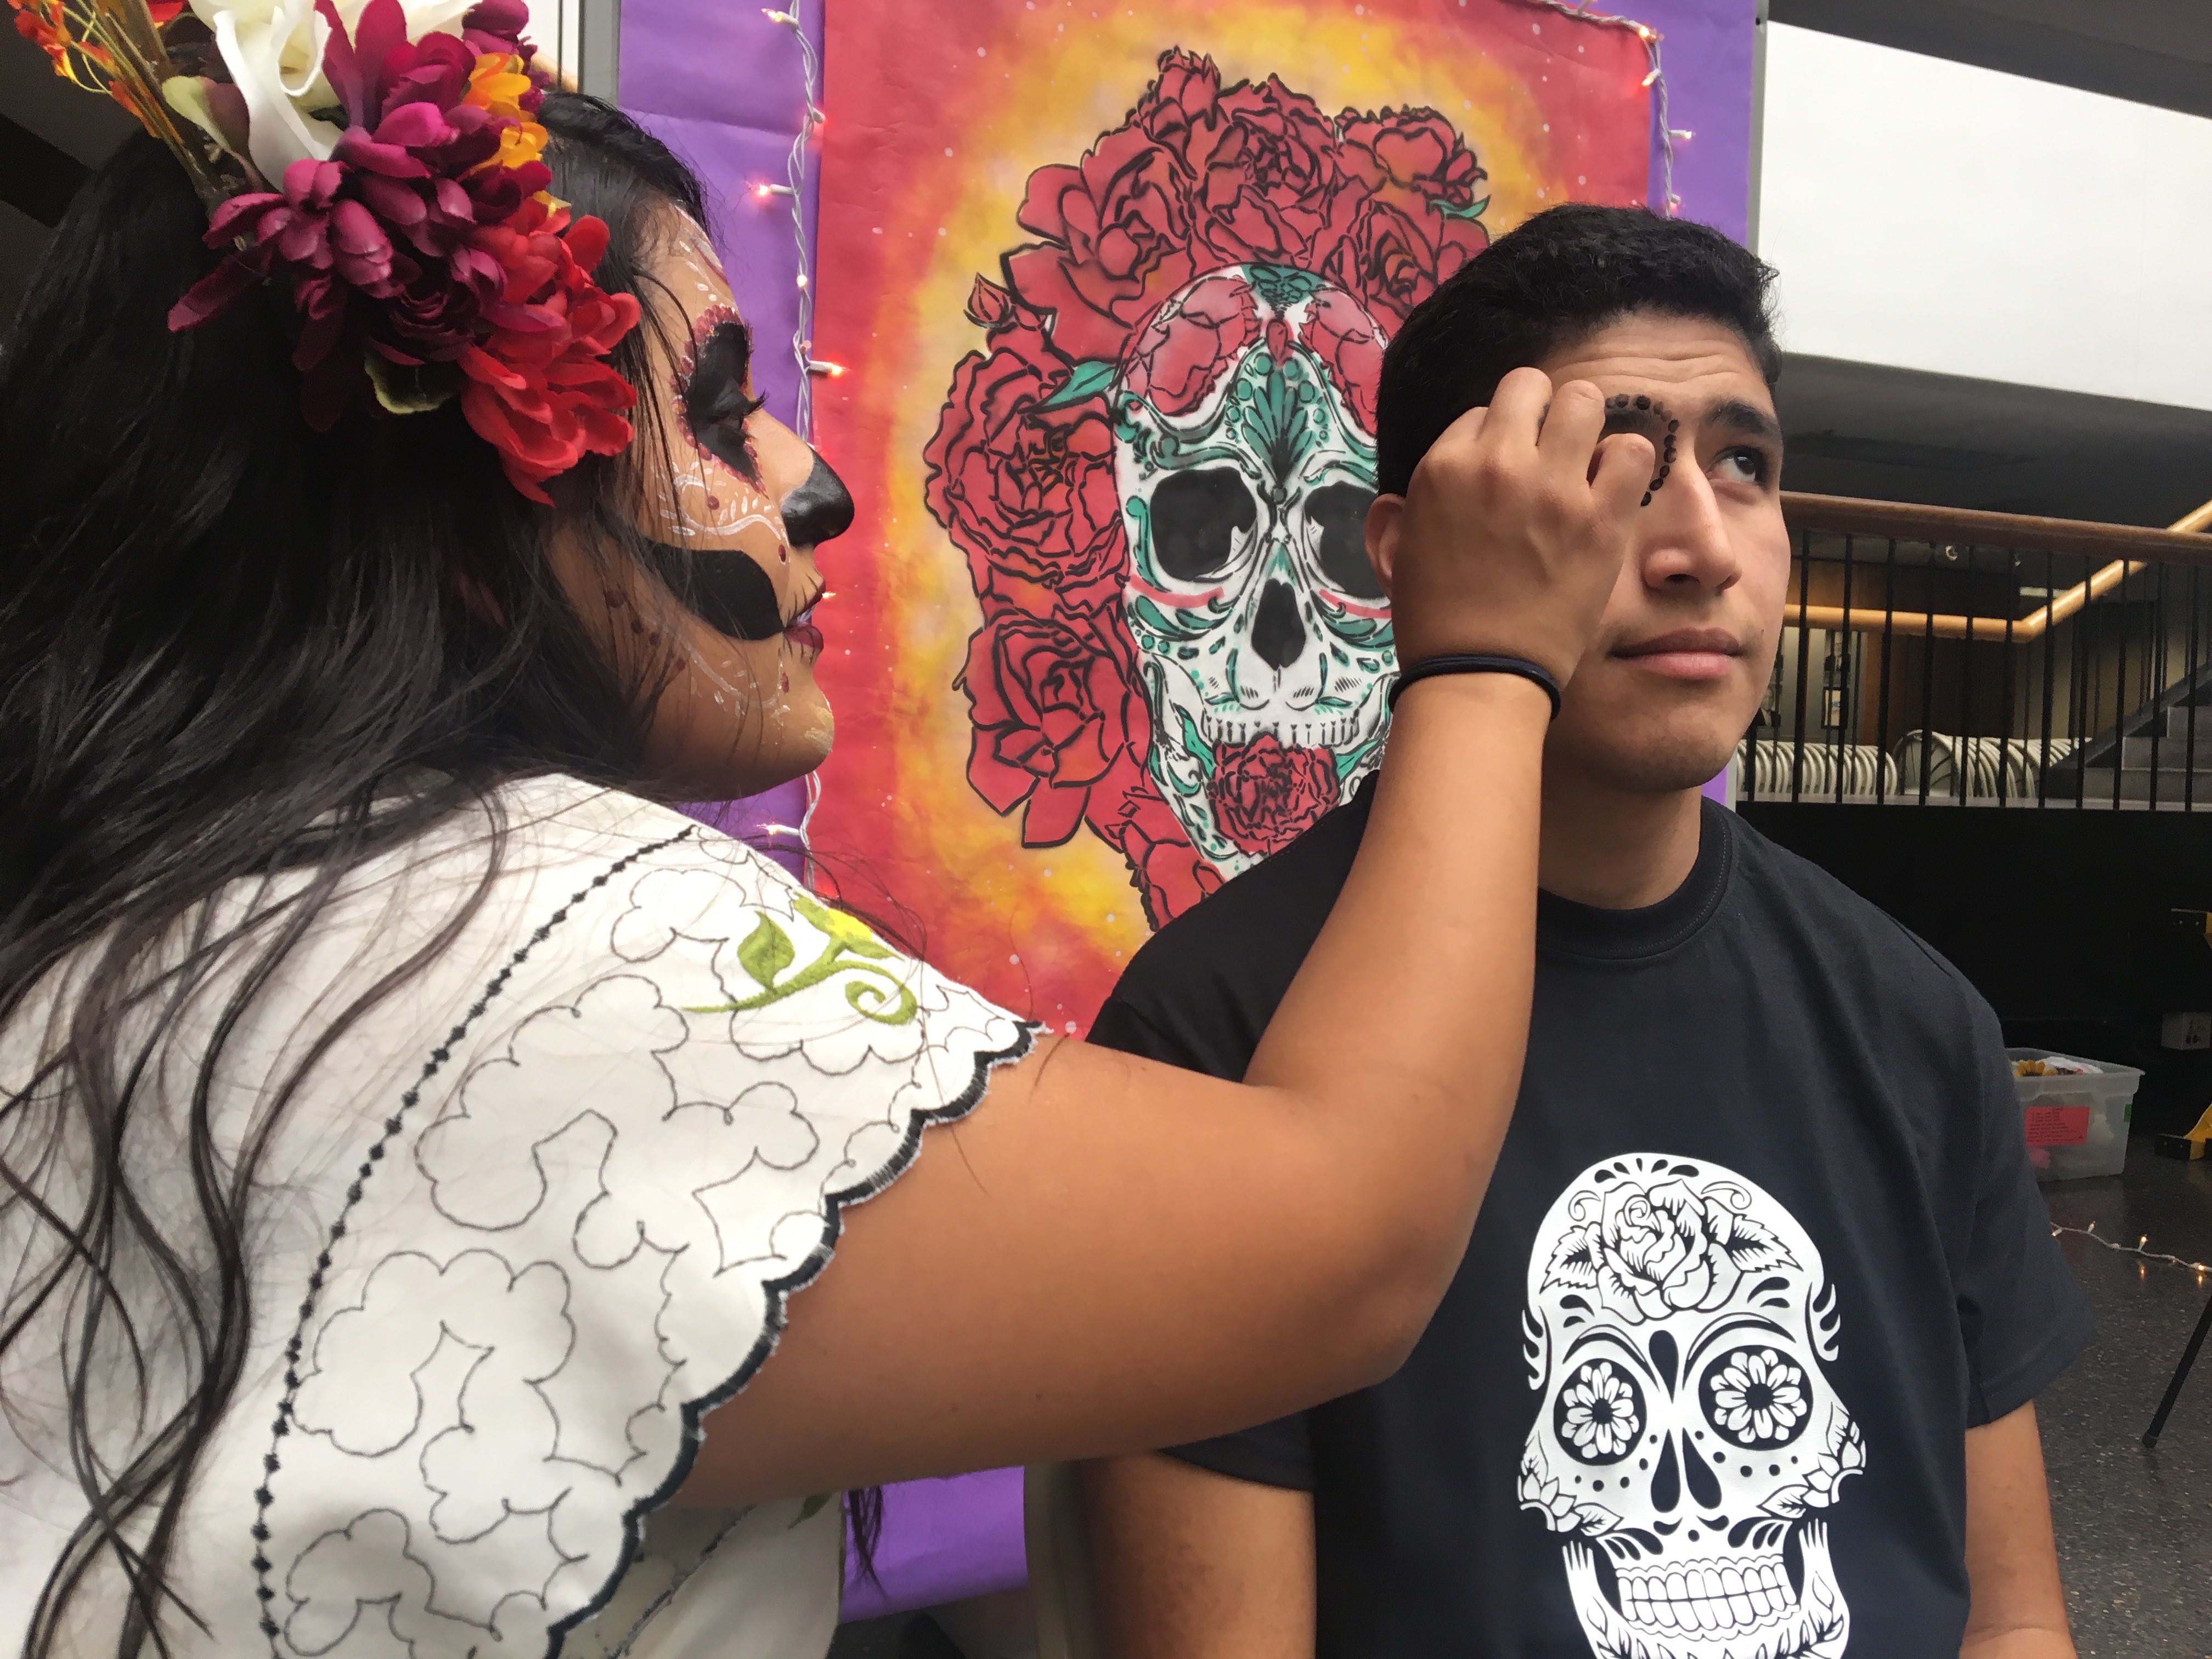 PHOTO: HACER celebrates the Mexican holiday Day of the Dead to remember loved ones and celebrate Hispanic culture. Photo by The Signal reporter Destini Smith.